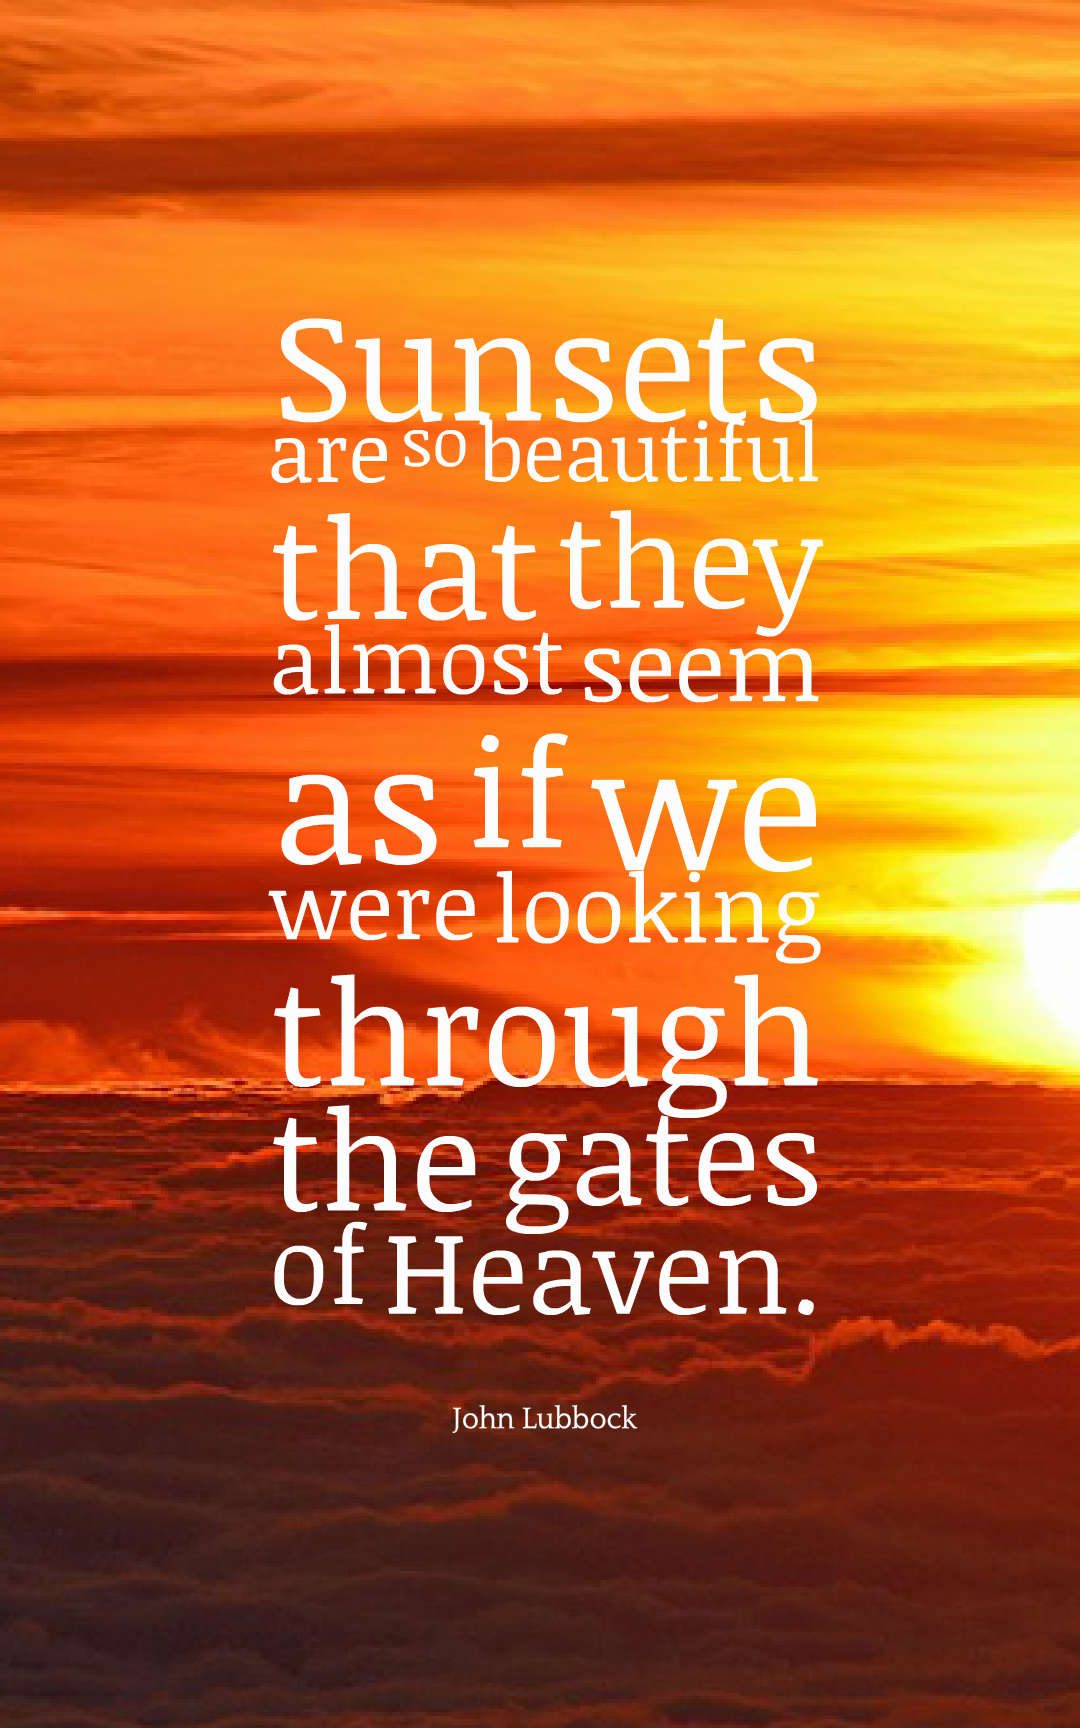 Sunsets are so beautiful that they almost seem as if we were looking through the gates of Heaven.